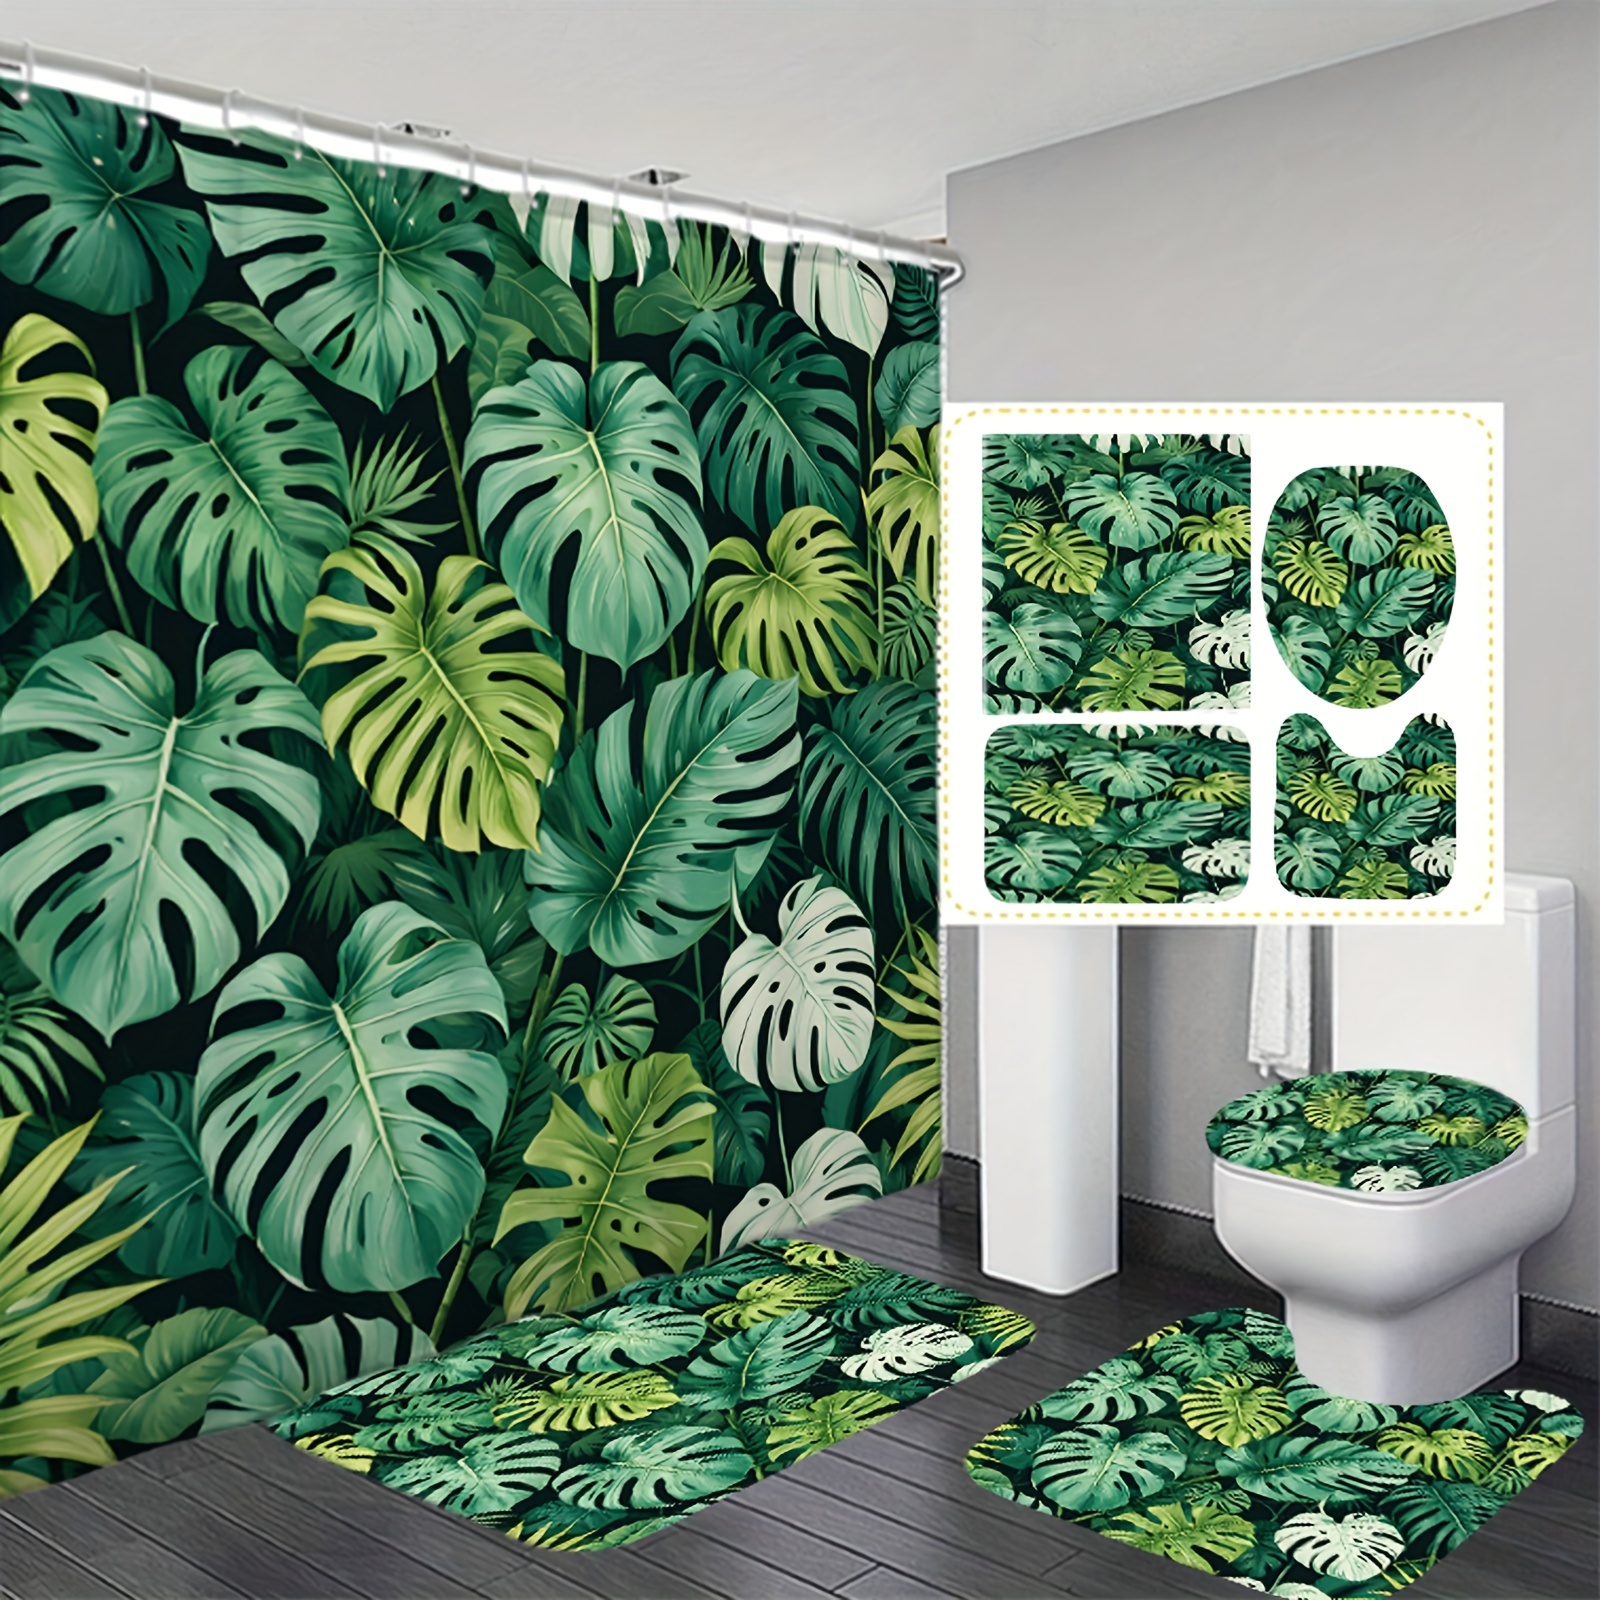 

1/4pcs Green Plant Print Shower Curtain Set, Waterproof Anti-mold Bathroom Shower Curtain With Non-slip Rugs, Toilet Lid Cover, And Bath Mat, Easy Install With C-type Hooks, Bathroom Decor